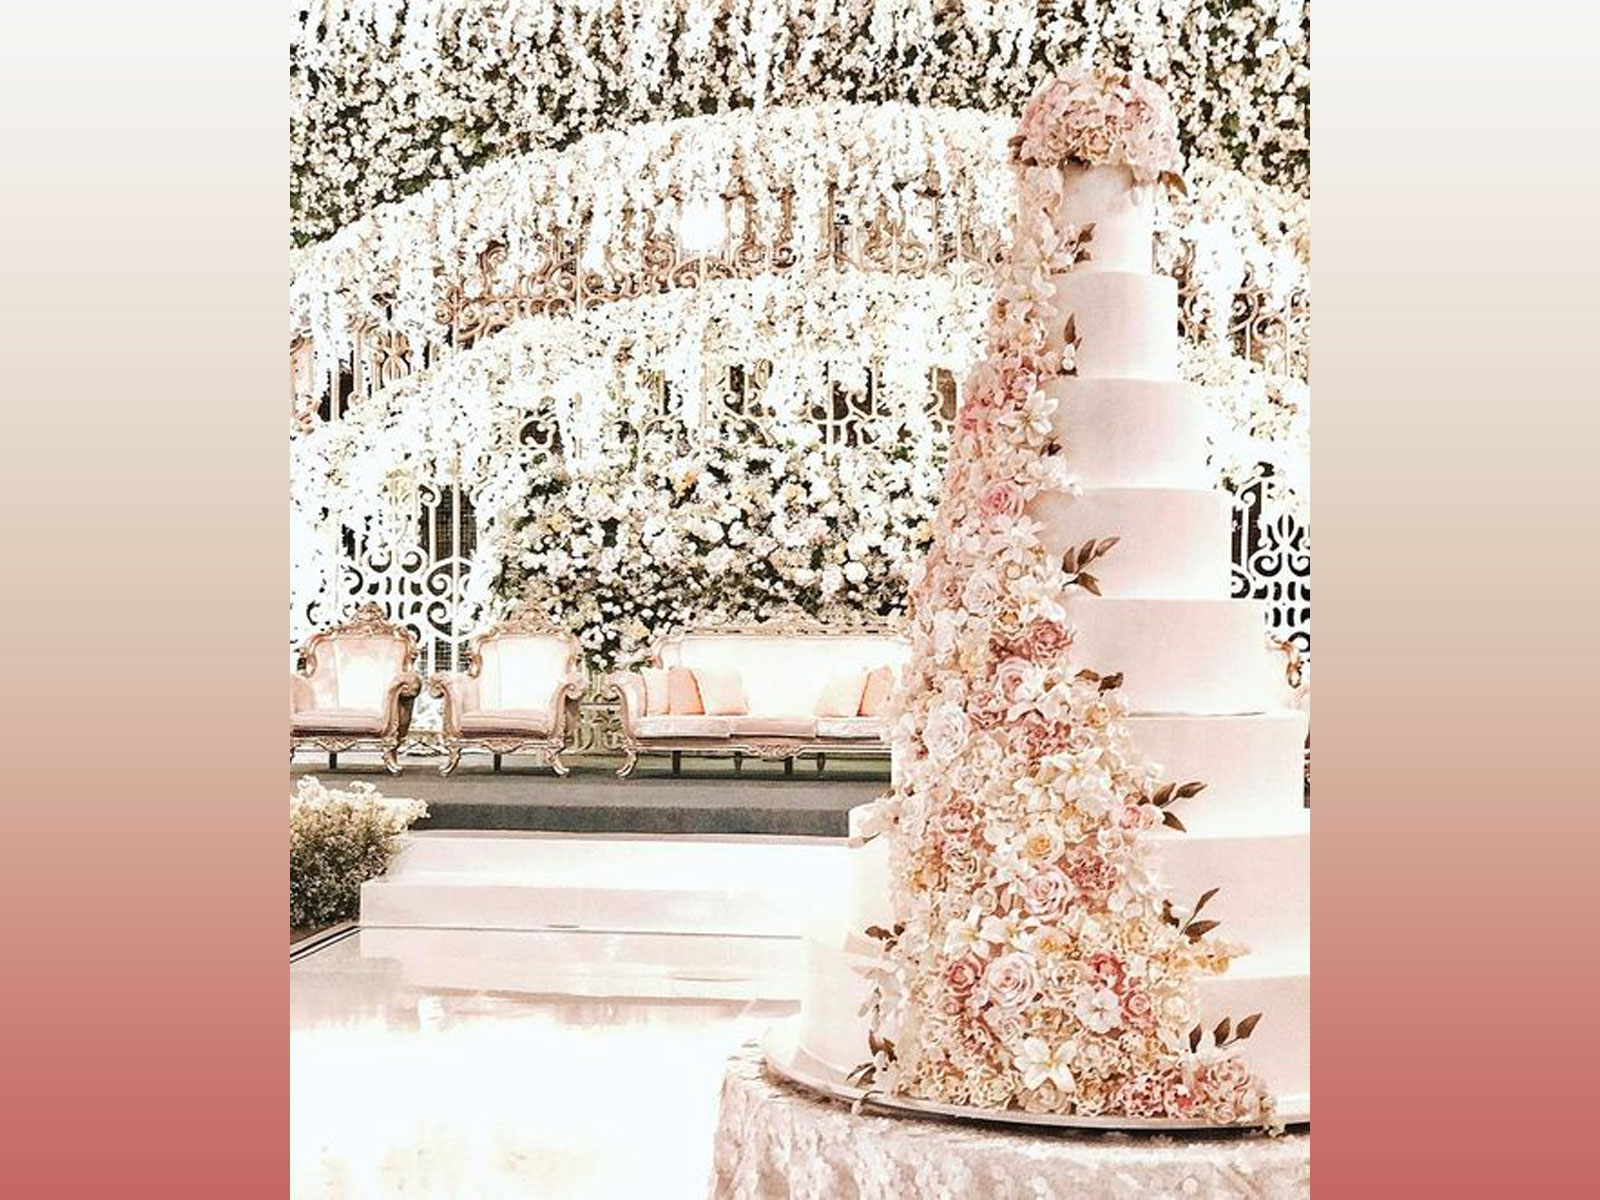 Rate These Wedding Cakes and We’ll Reveal What Your Next Boyfriend Will Be Like 1218